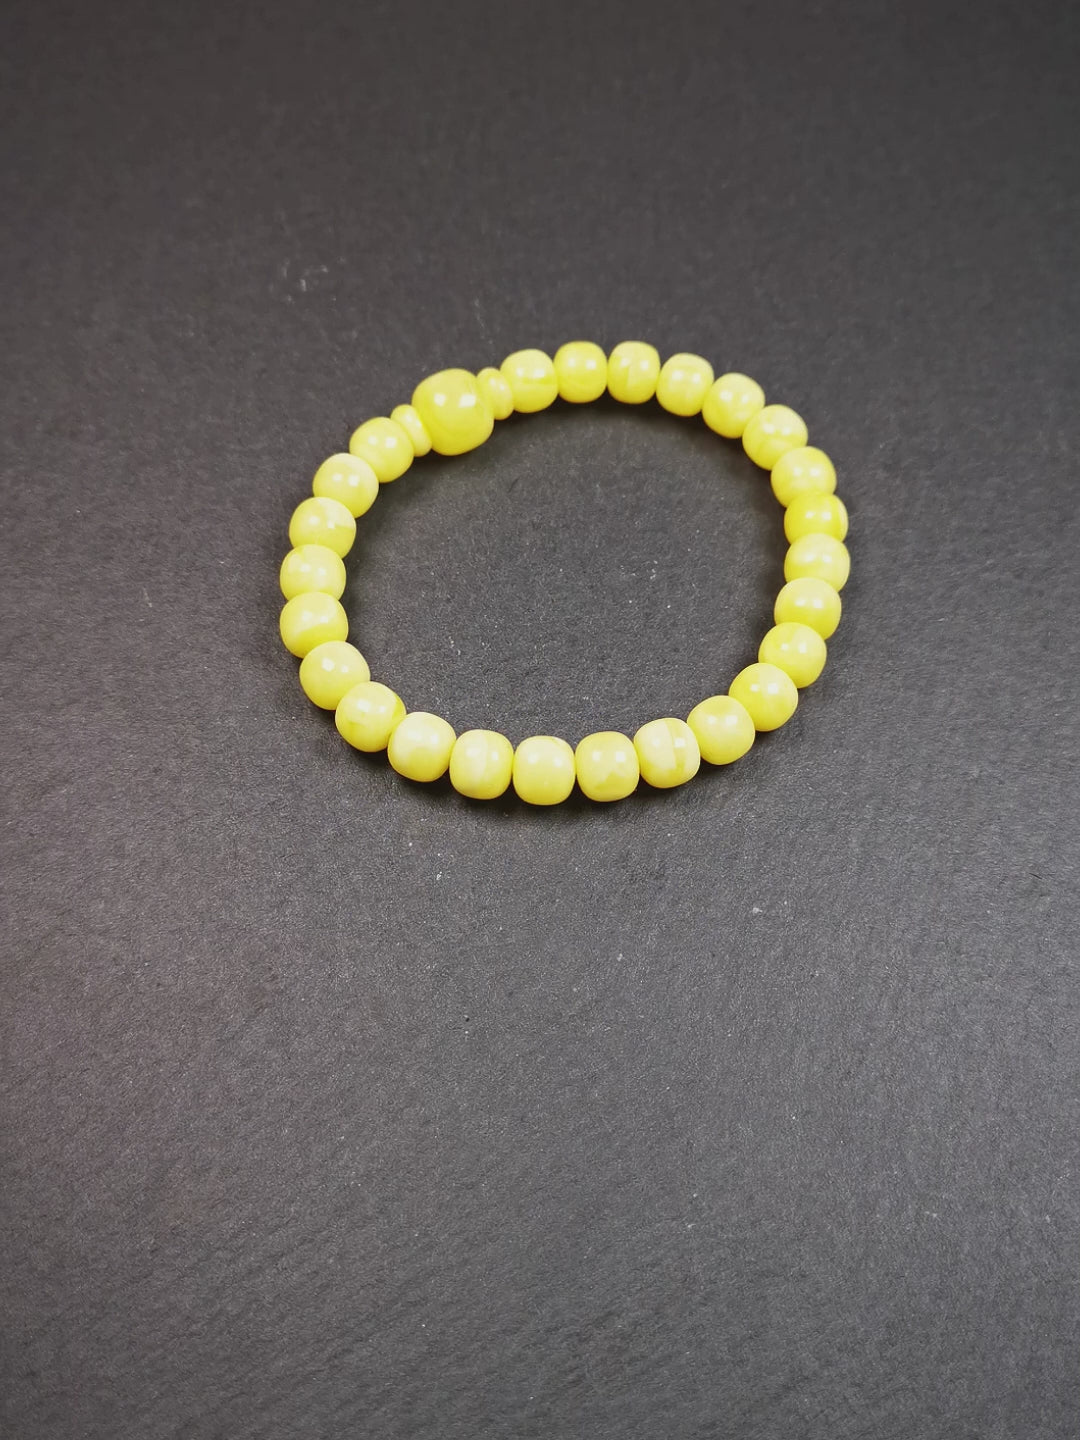 This amber beads bracelet was hand-woven by Tibetans from Baiyu County,Tibet. It is made of amber, yellow color,consists 1 main bead,25 small beads and 2 spacer beads,tie with elastic cord to fit your wrist.